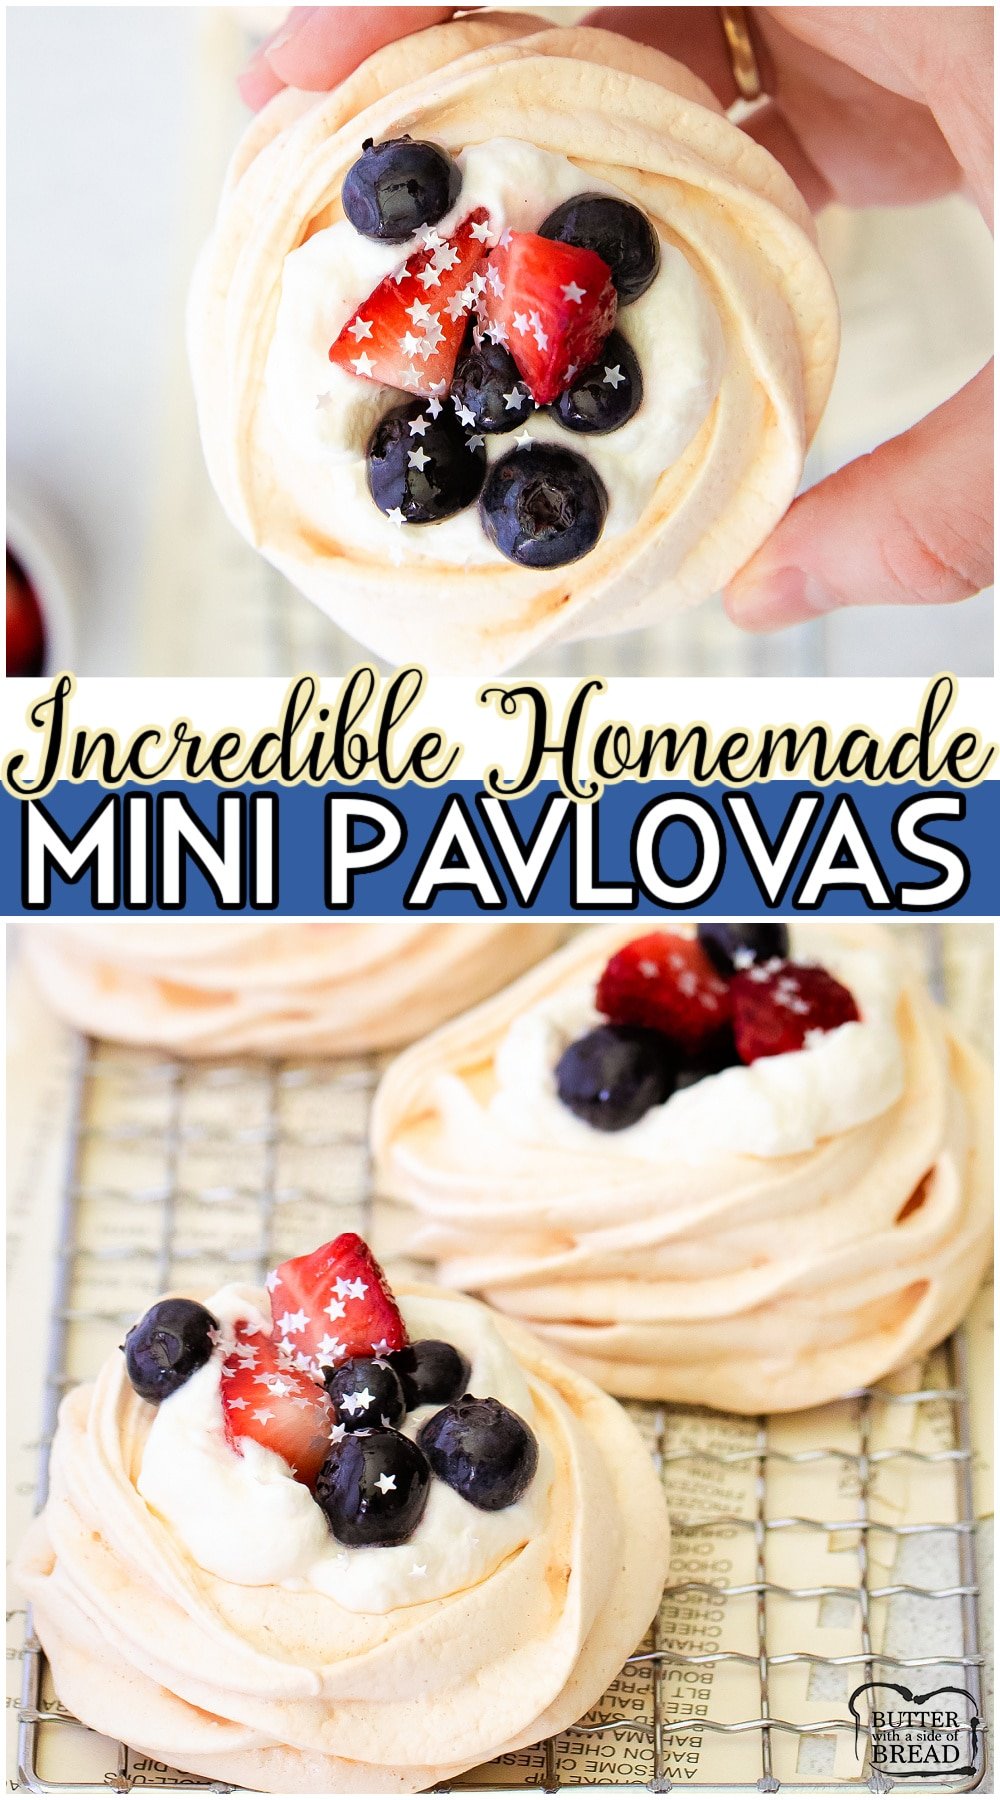 Mini Pavlovas are like a tasty and addictingly delicious meringue shells filled and topped with everything from whipped cream to lemon curd. This mini pavlovas shells recipe gives you the opportunity to try any filling you want for your individual pavlova dessert.